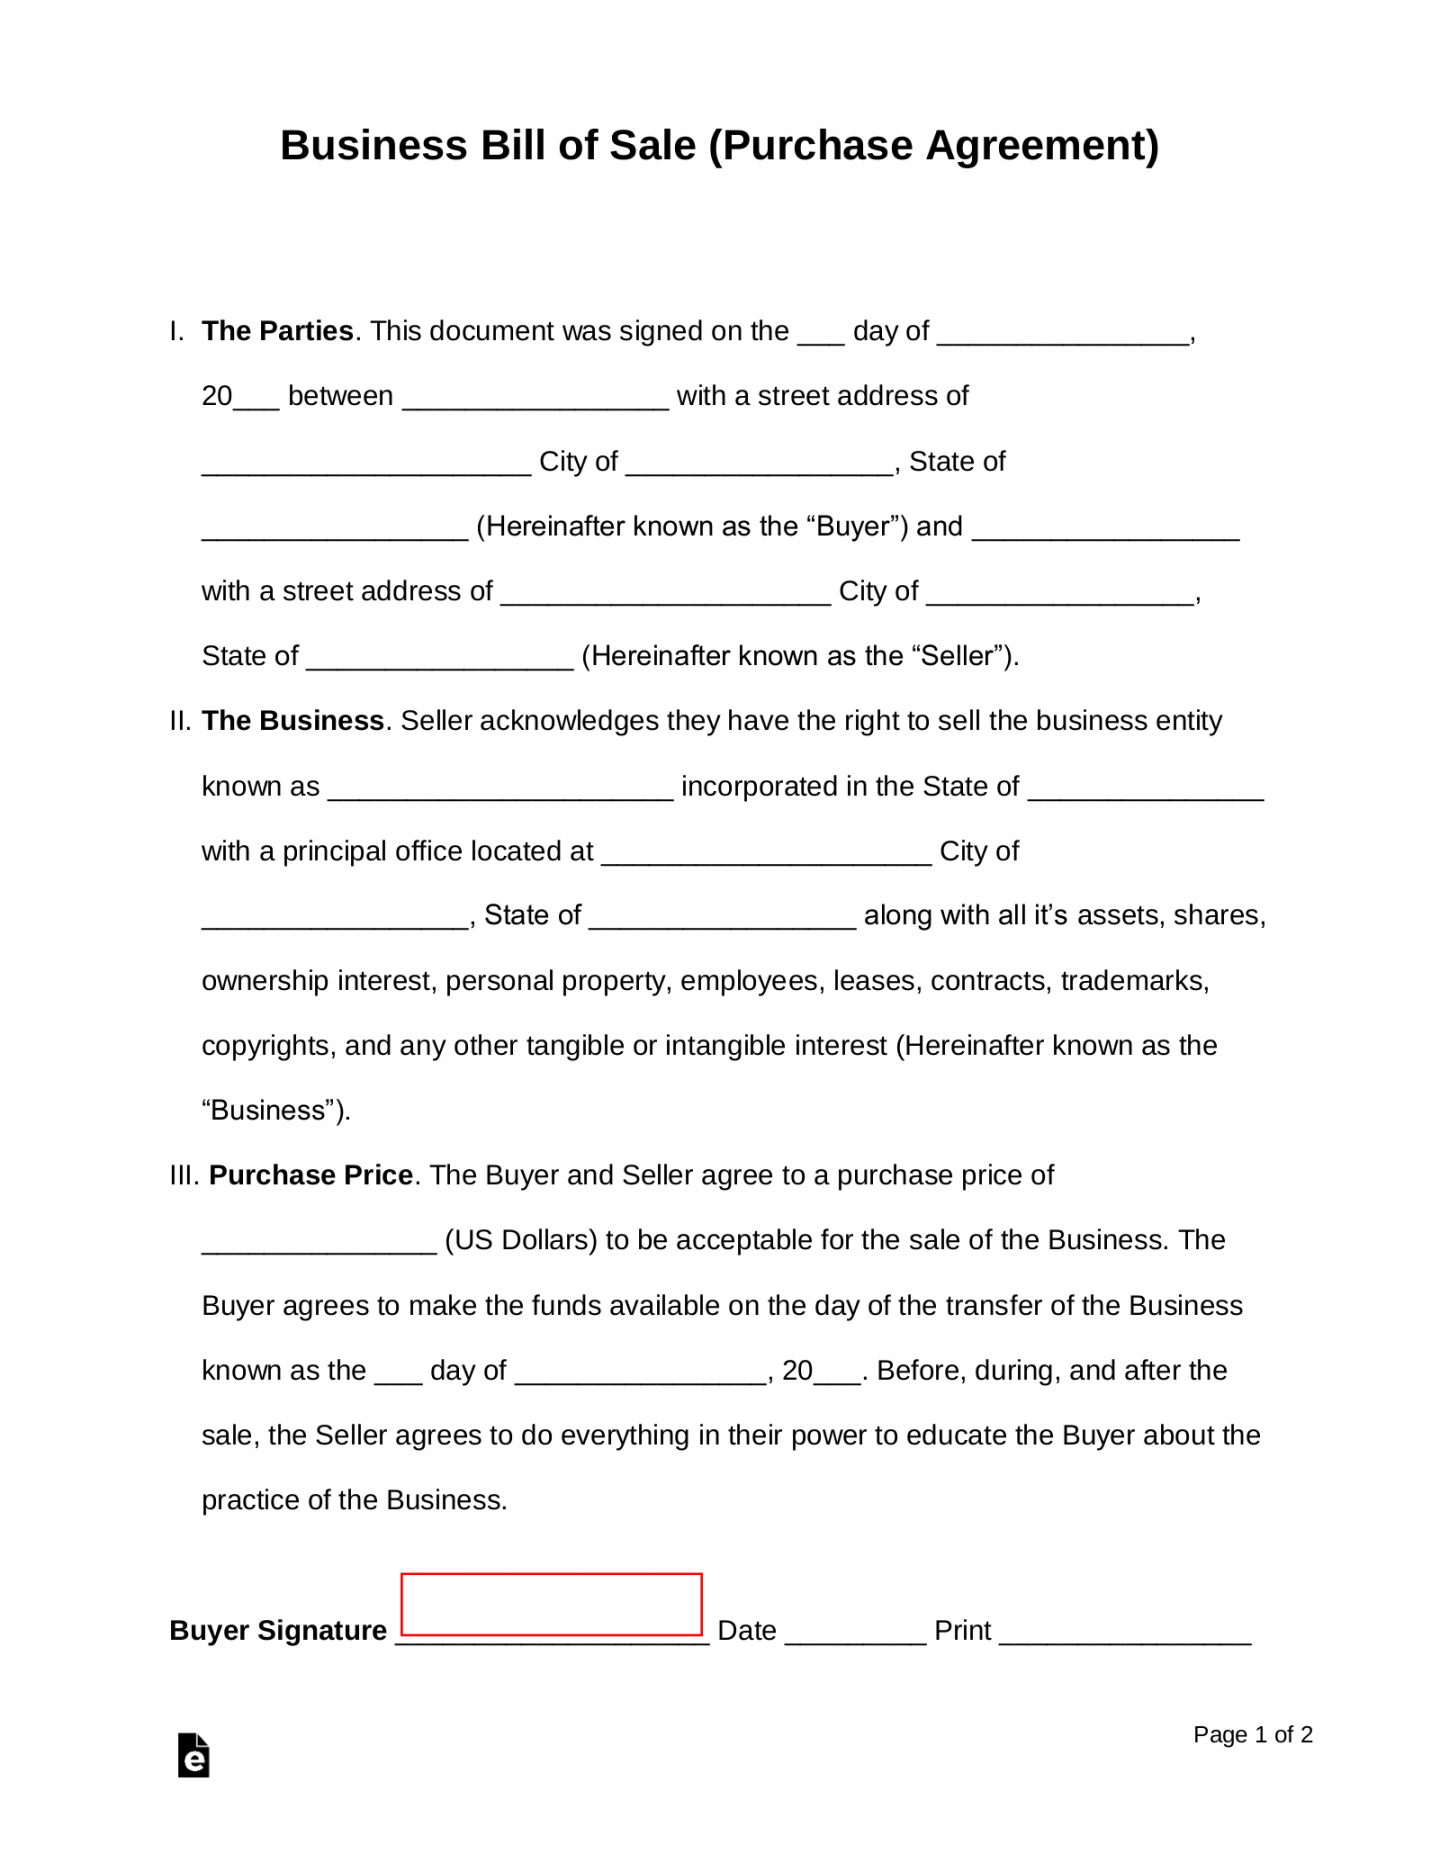 free business bill of sale form purchase agreement  word  pdf  eforms nventory agreement template excel